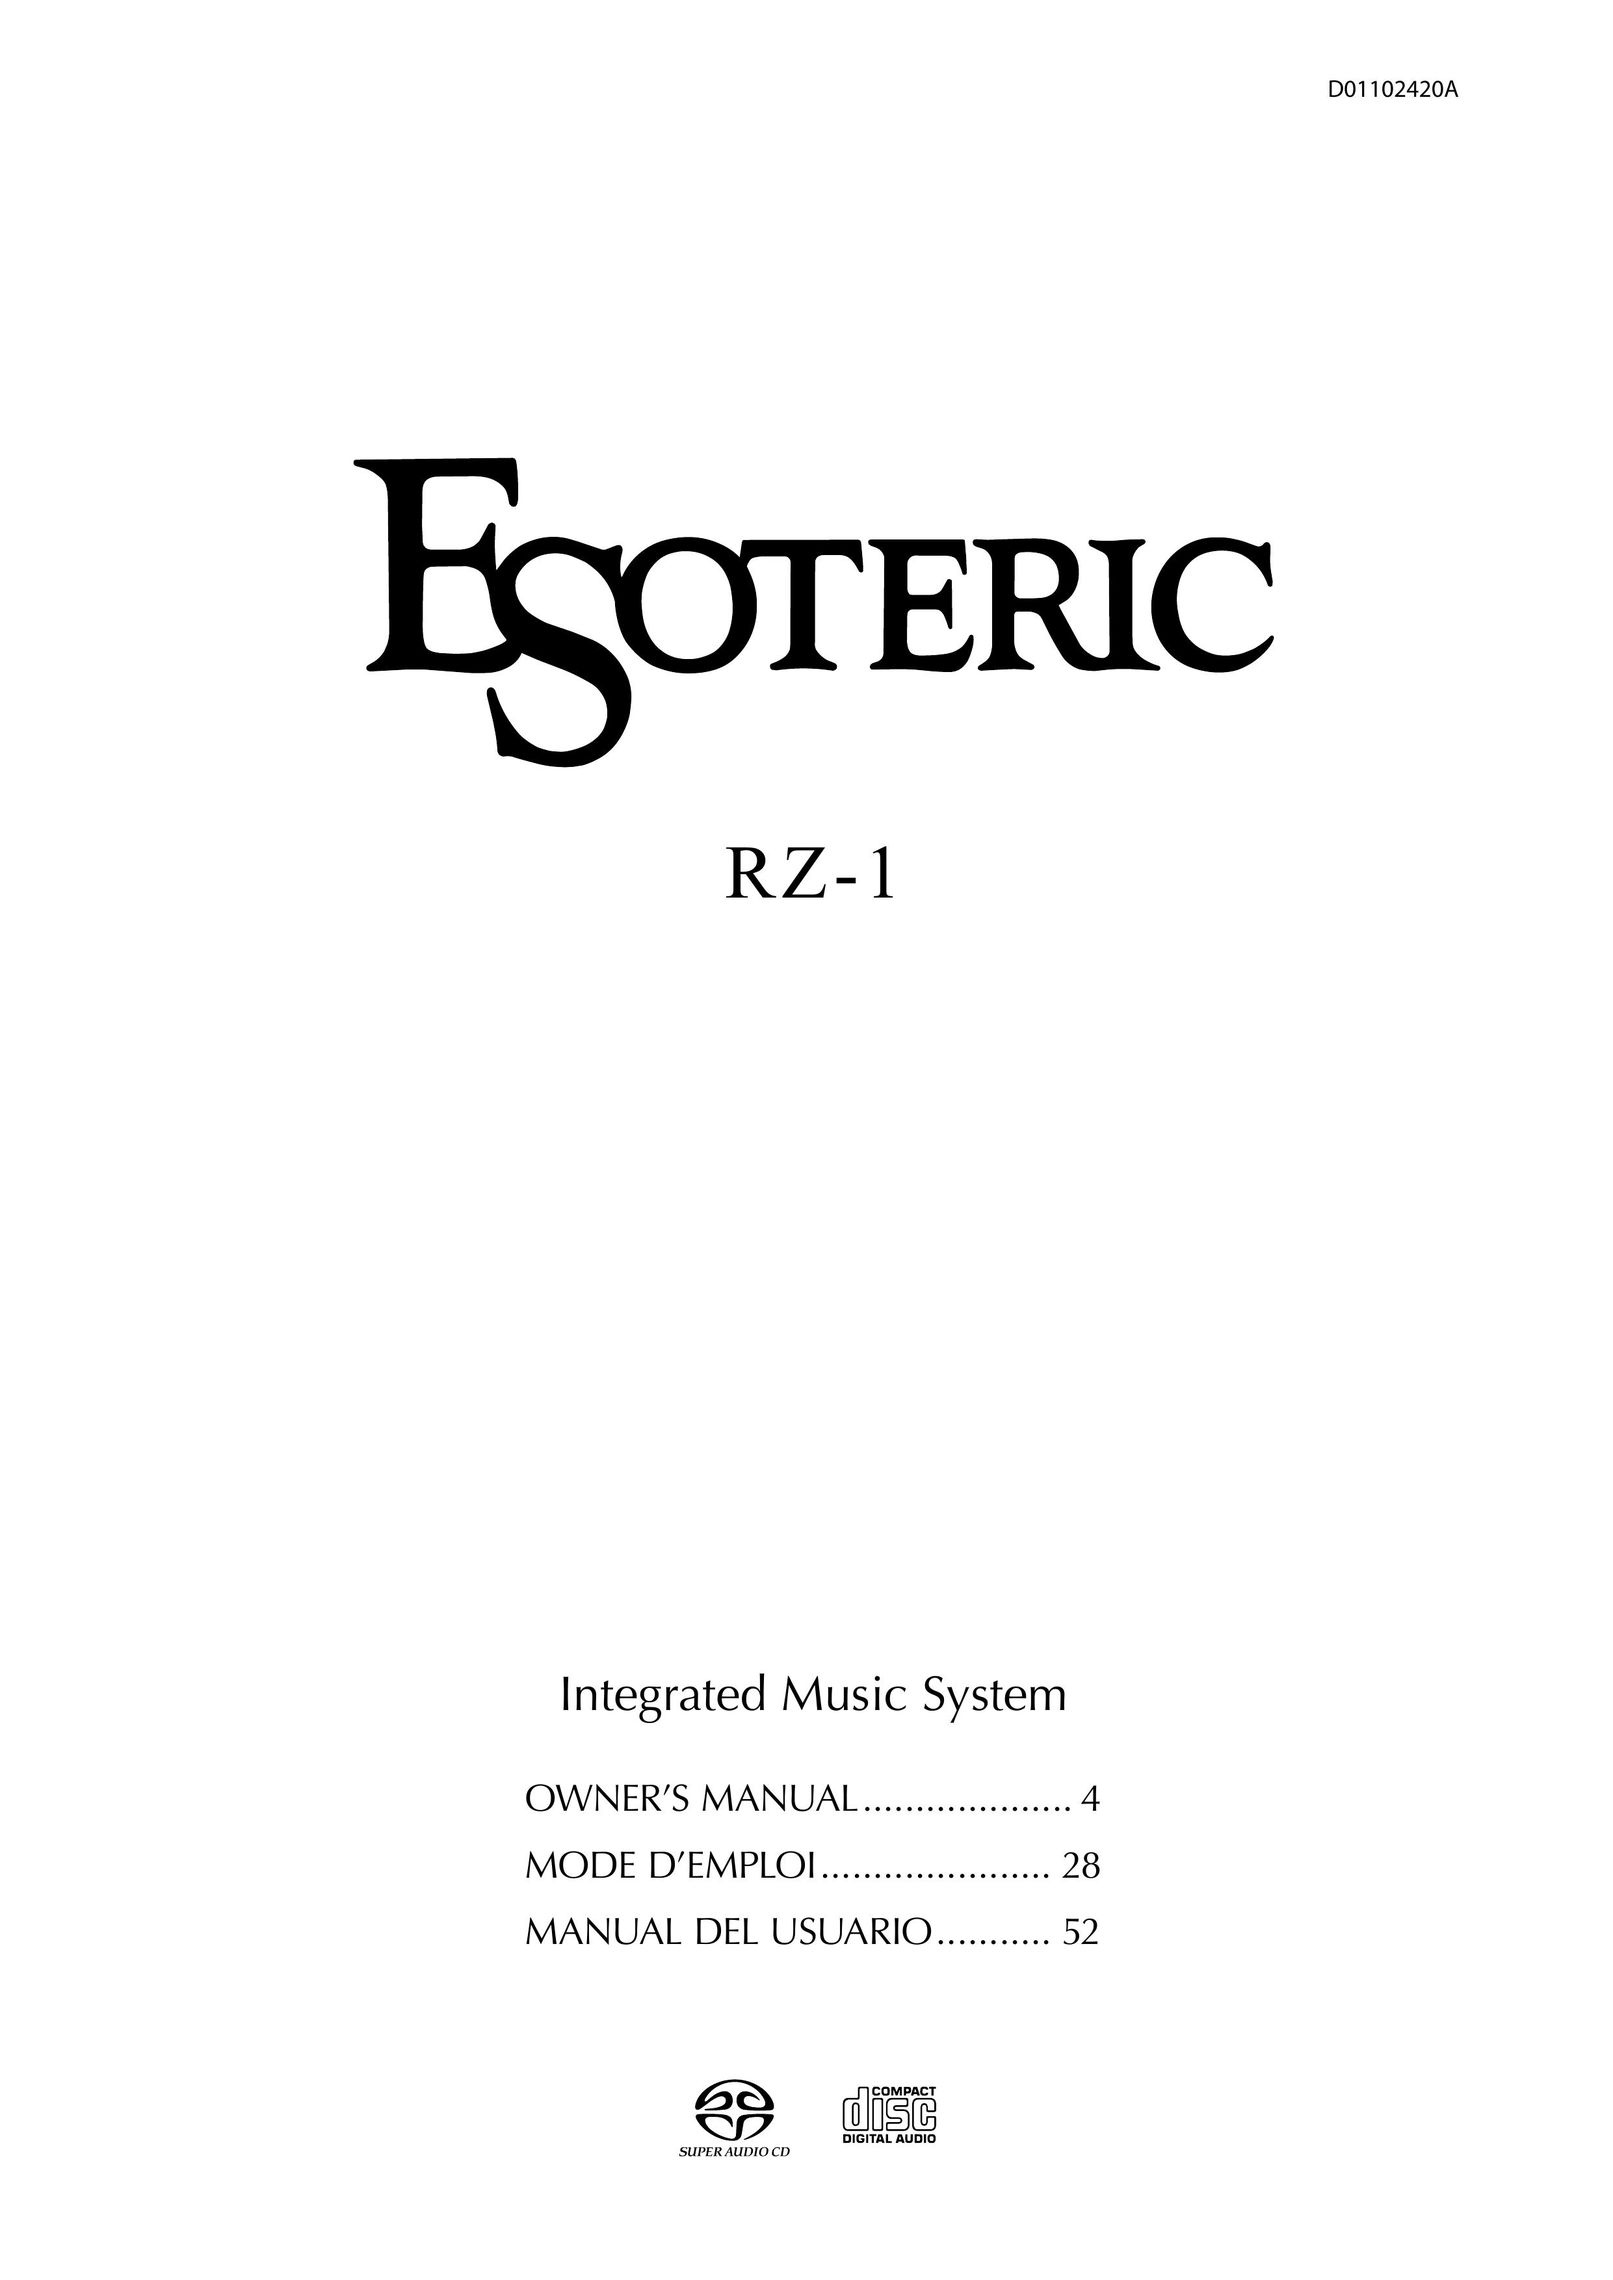 Esoteric RZ-1 Stereo System User Manual